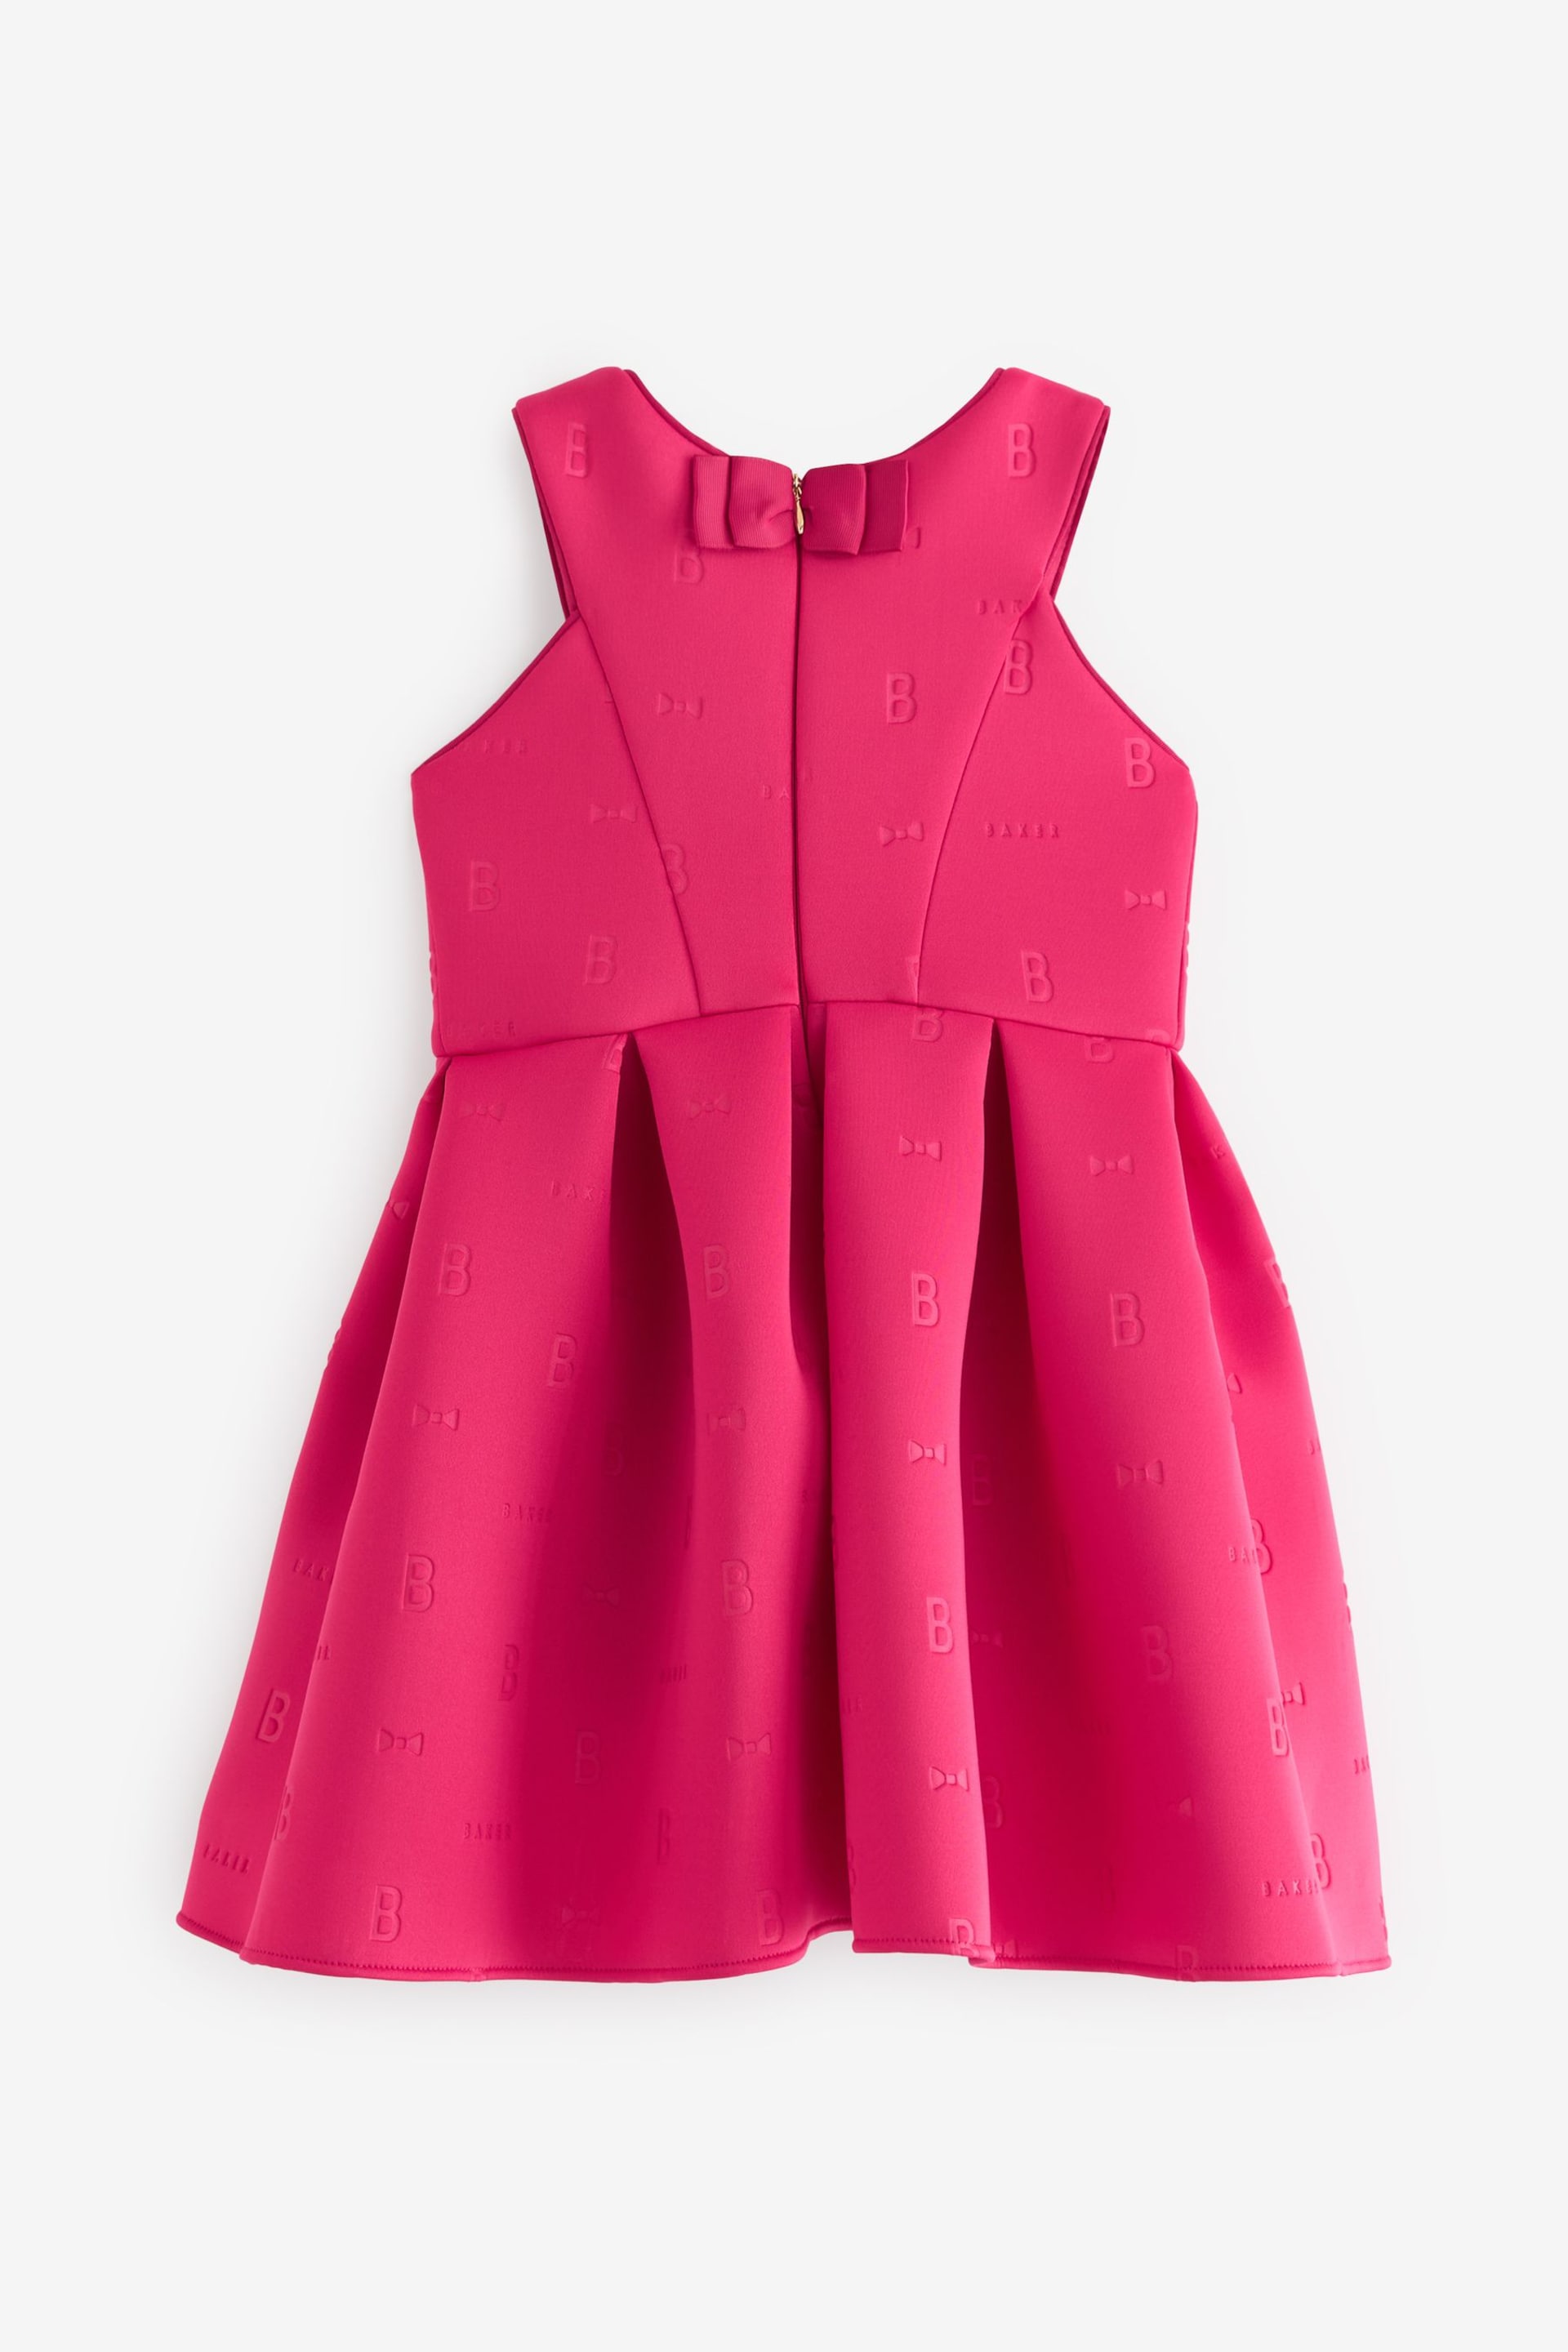 Baker by Ted Baker Red Seam Scuba Dress - Image 7 of 9